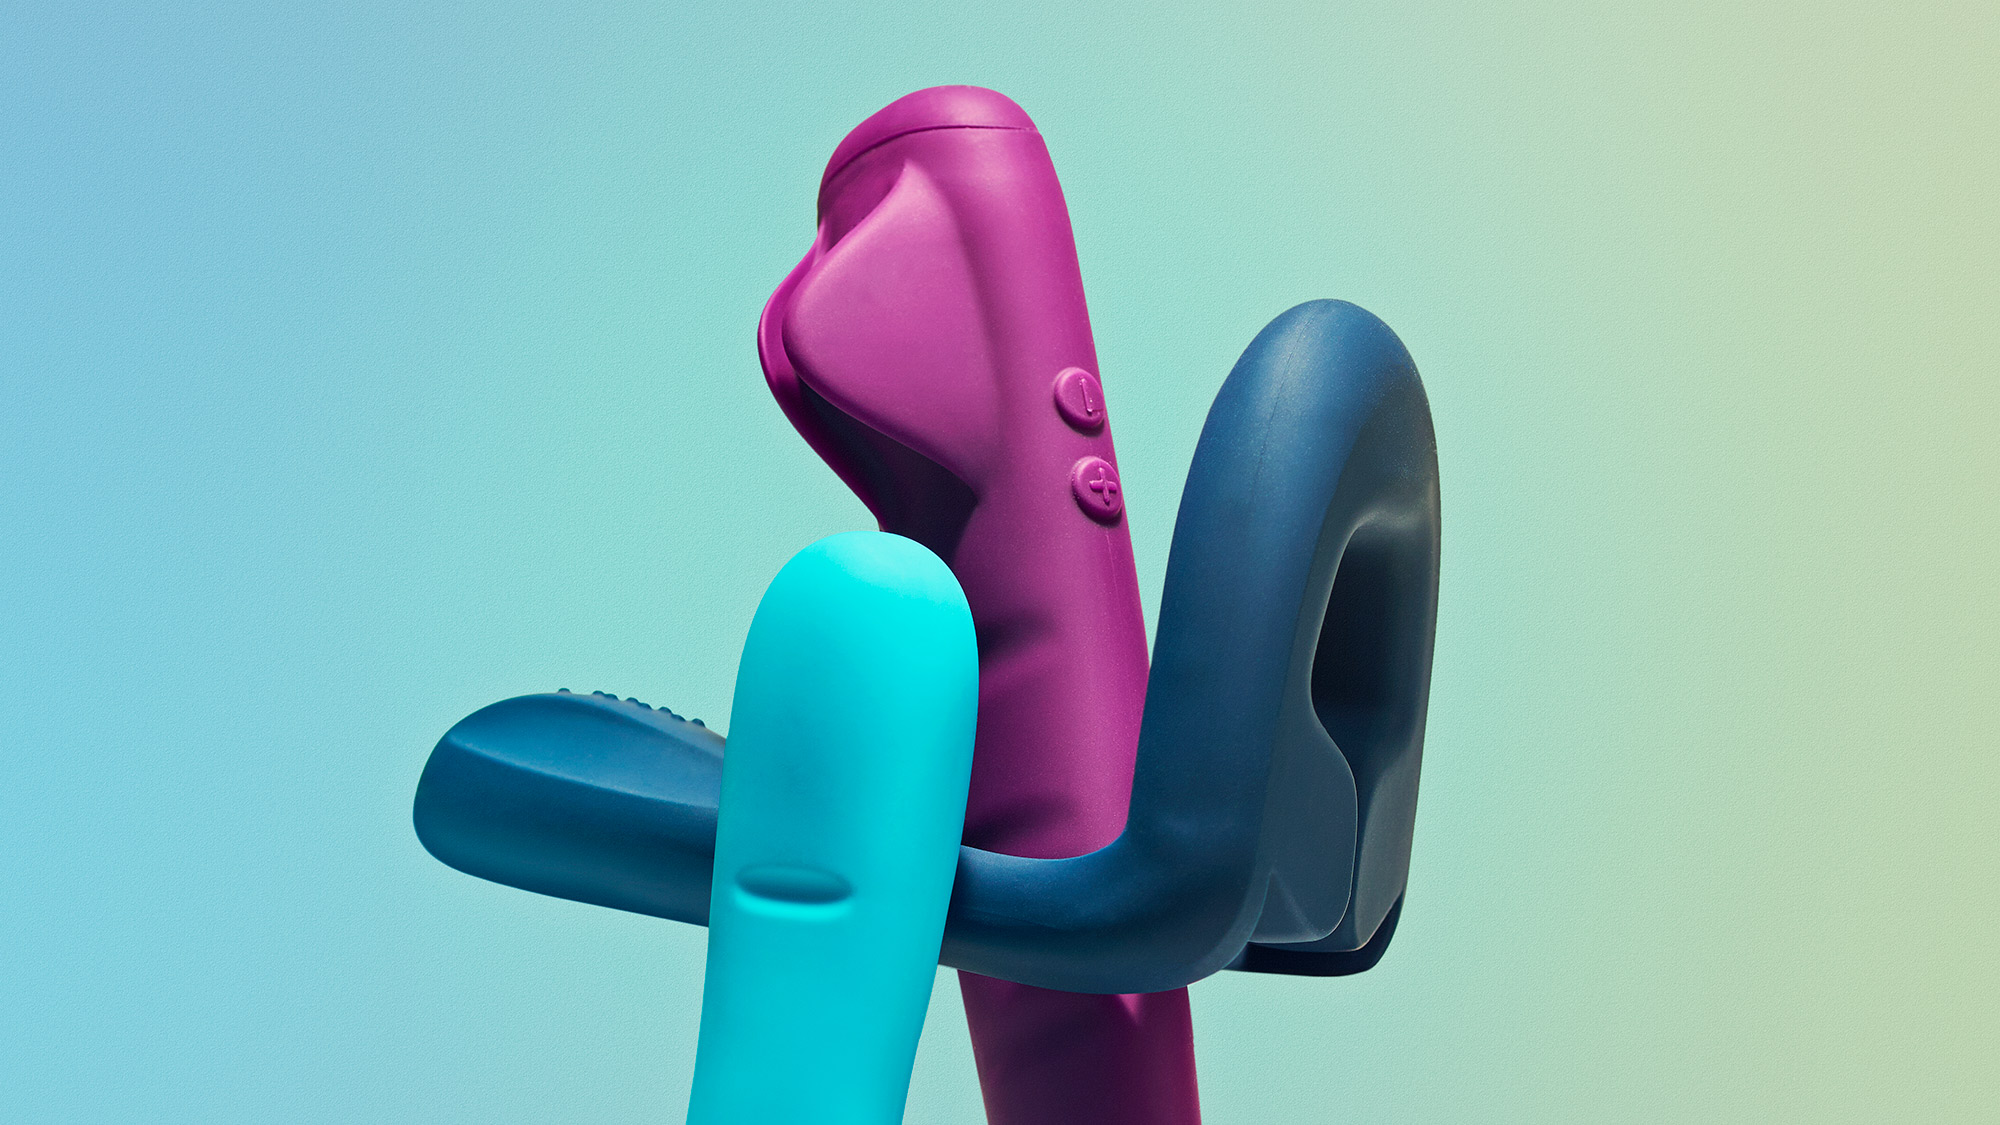 Sex toys engineered to be medical devices Popular Science photo photo